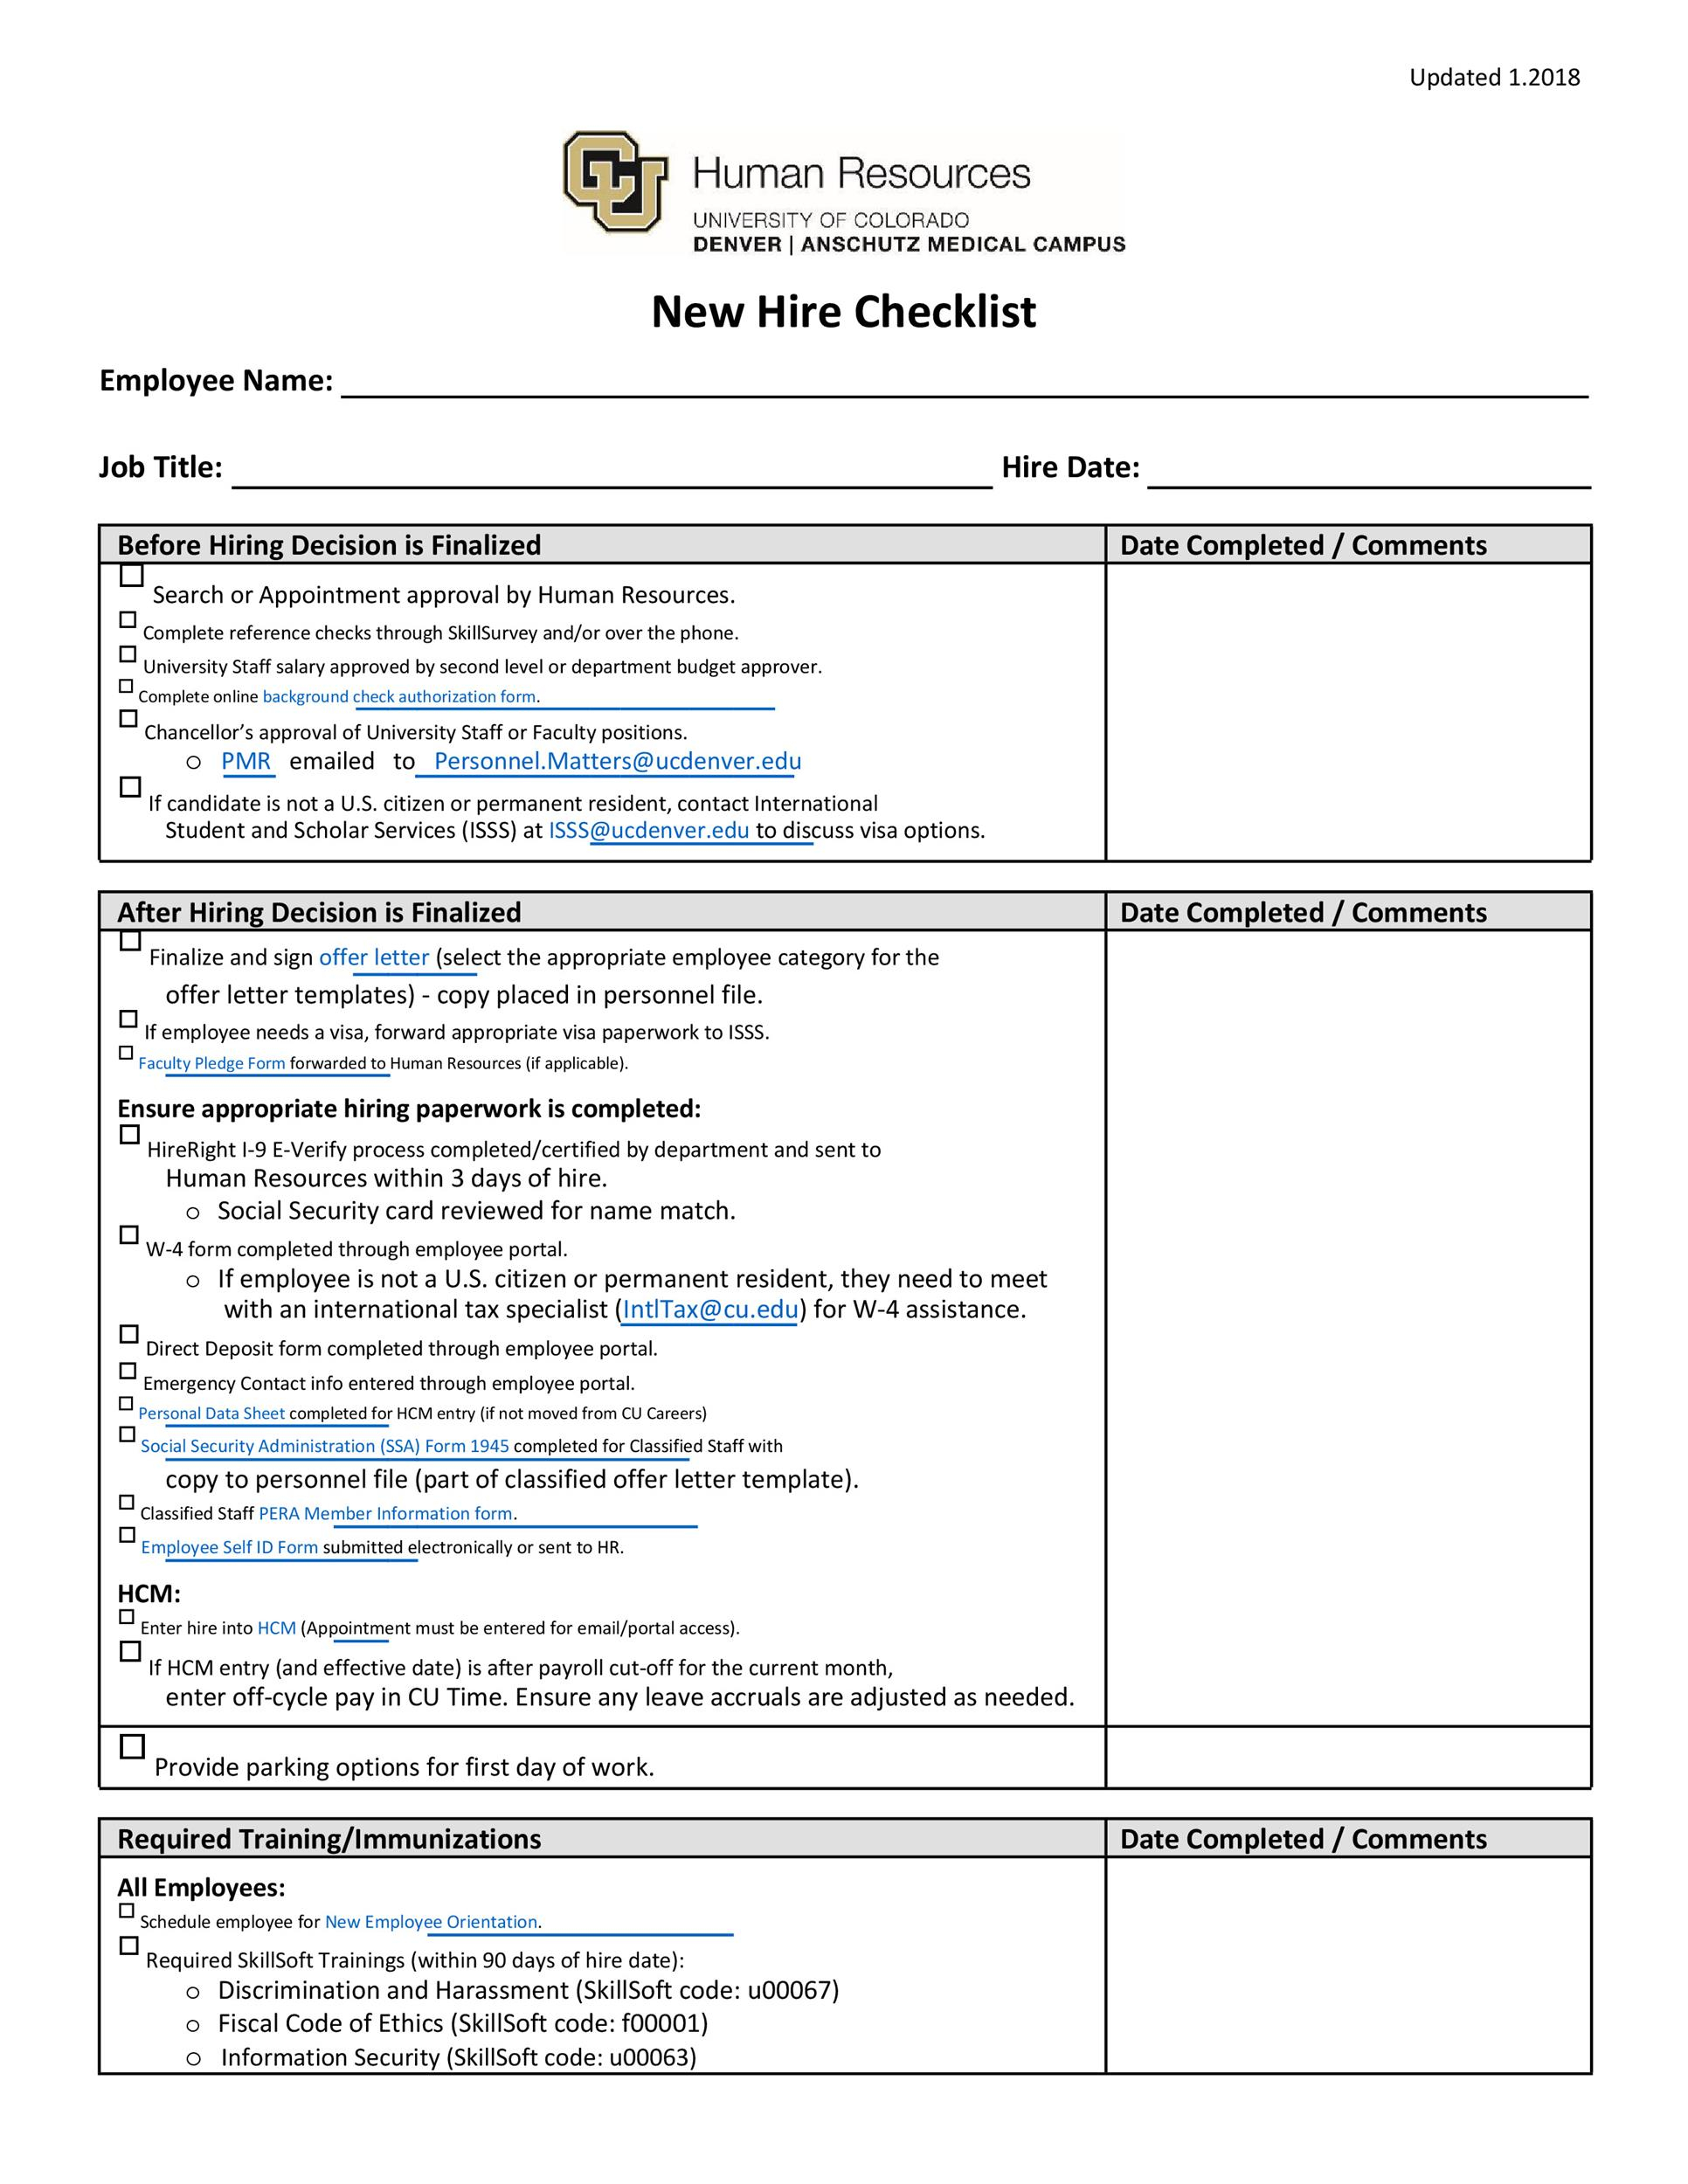 11 Useful New Hire Checklist Templates & Forms ᐅ TemplateLab Within Personnel File Checklist Template Throughout Personnel File Checklist Template